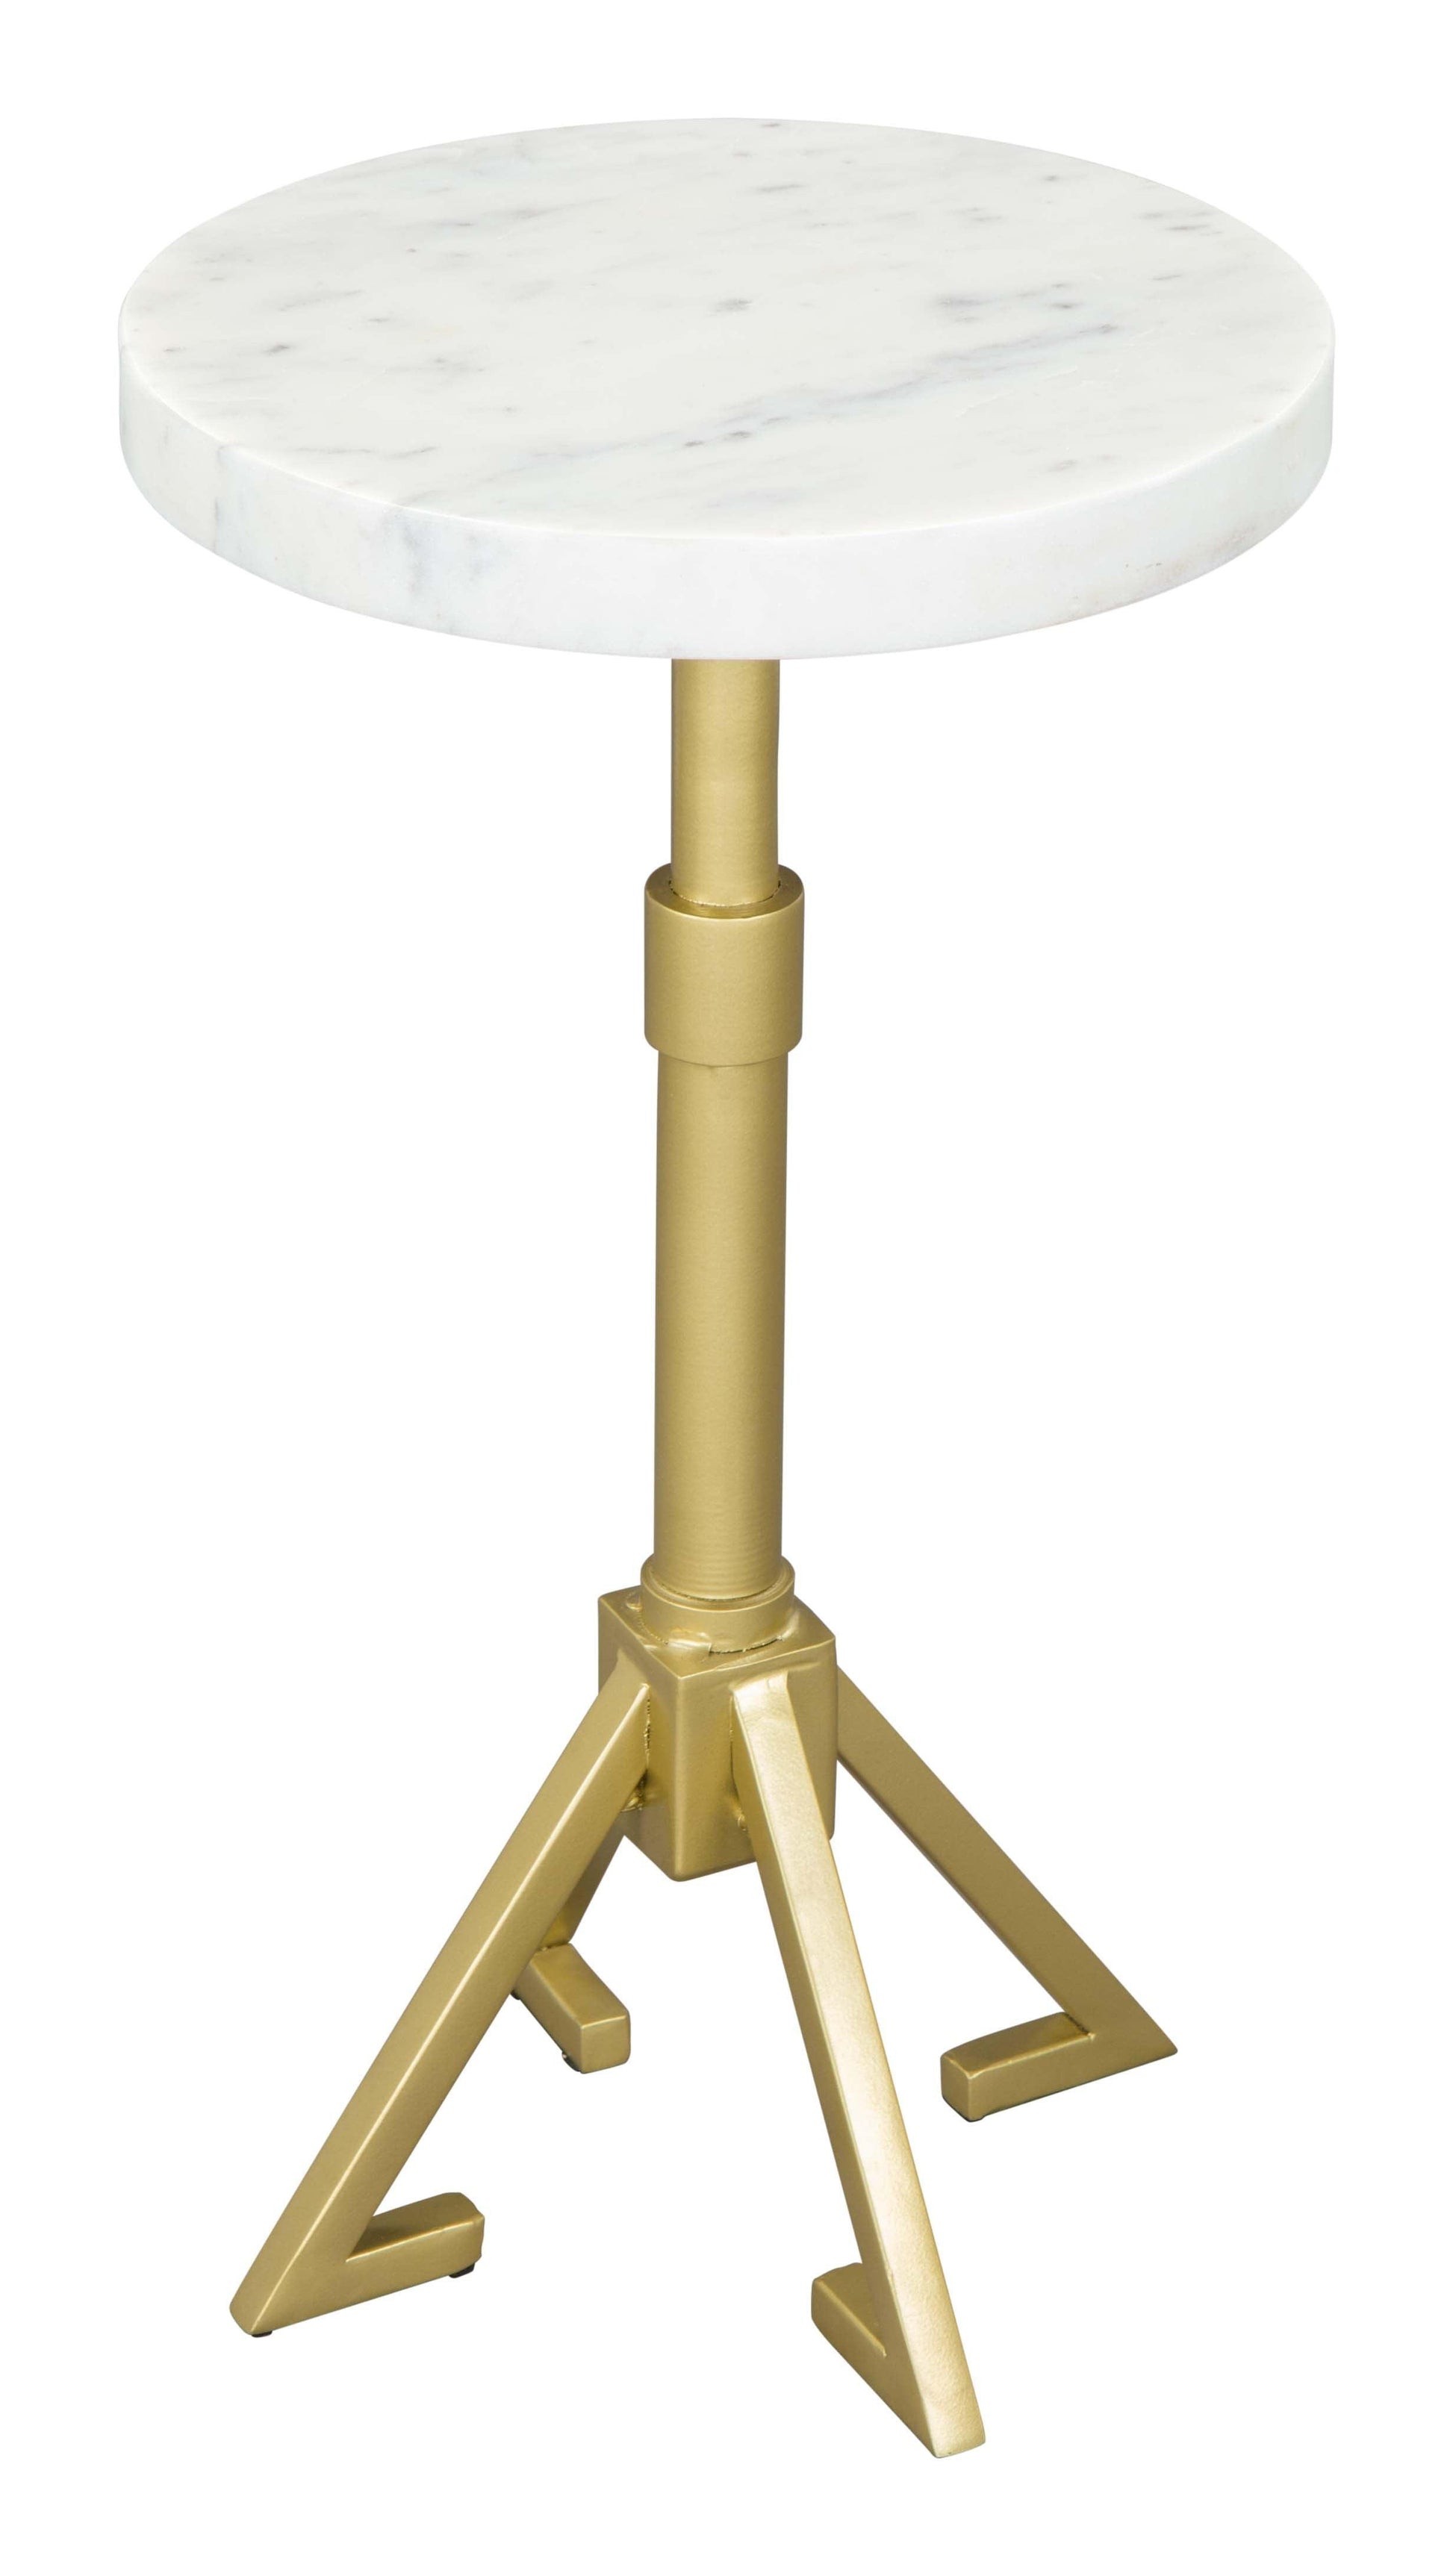 Maurice Side Table White & Gold - Sideboards and Things Accents_Gold, ADD TO FAIRE, Brand_Zuo Modern, Color_Gold, Color_White, Depth_10-20, Finish_Powder Coated, Height_20-30, Materials_Metal, Materials_Stone, Metal Type_Iron, Product Type_Side Table, Stone Type_Marble, Width_10-20